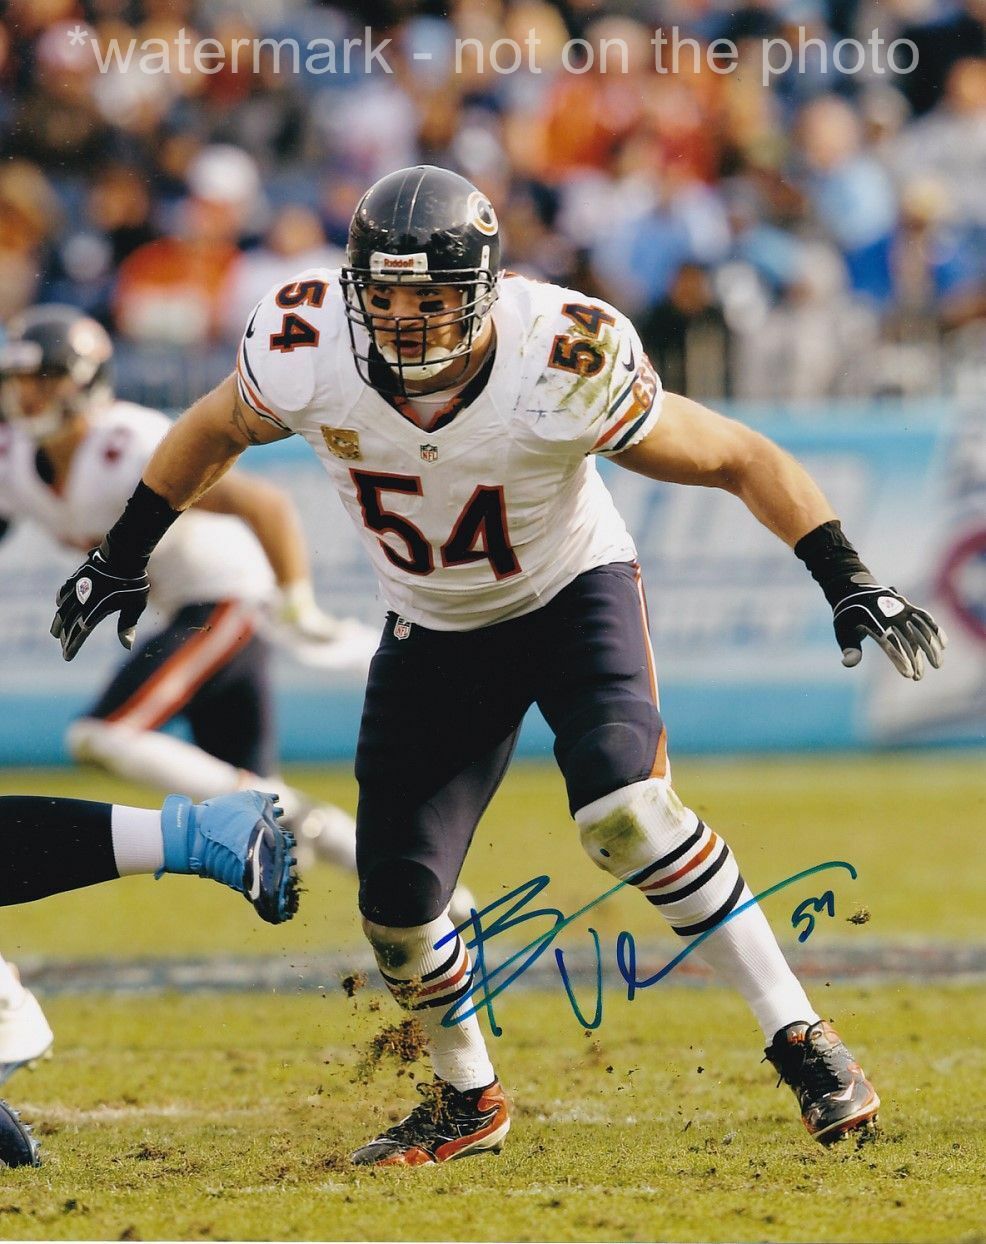 BRIAN URLACHER SIGNED AUTOGRAPH 8X10 Photo Poster painting CHICAGO BEARS